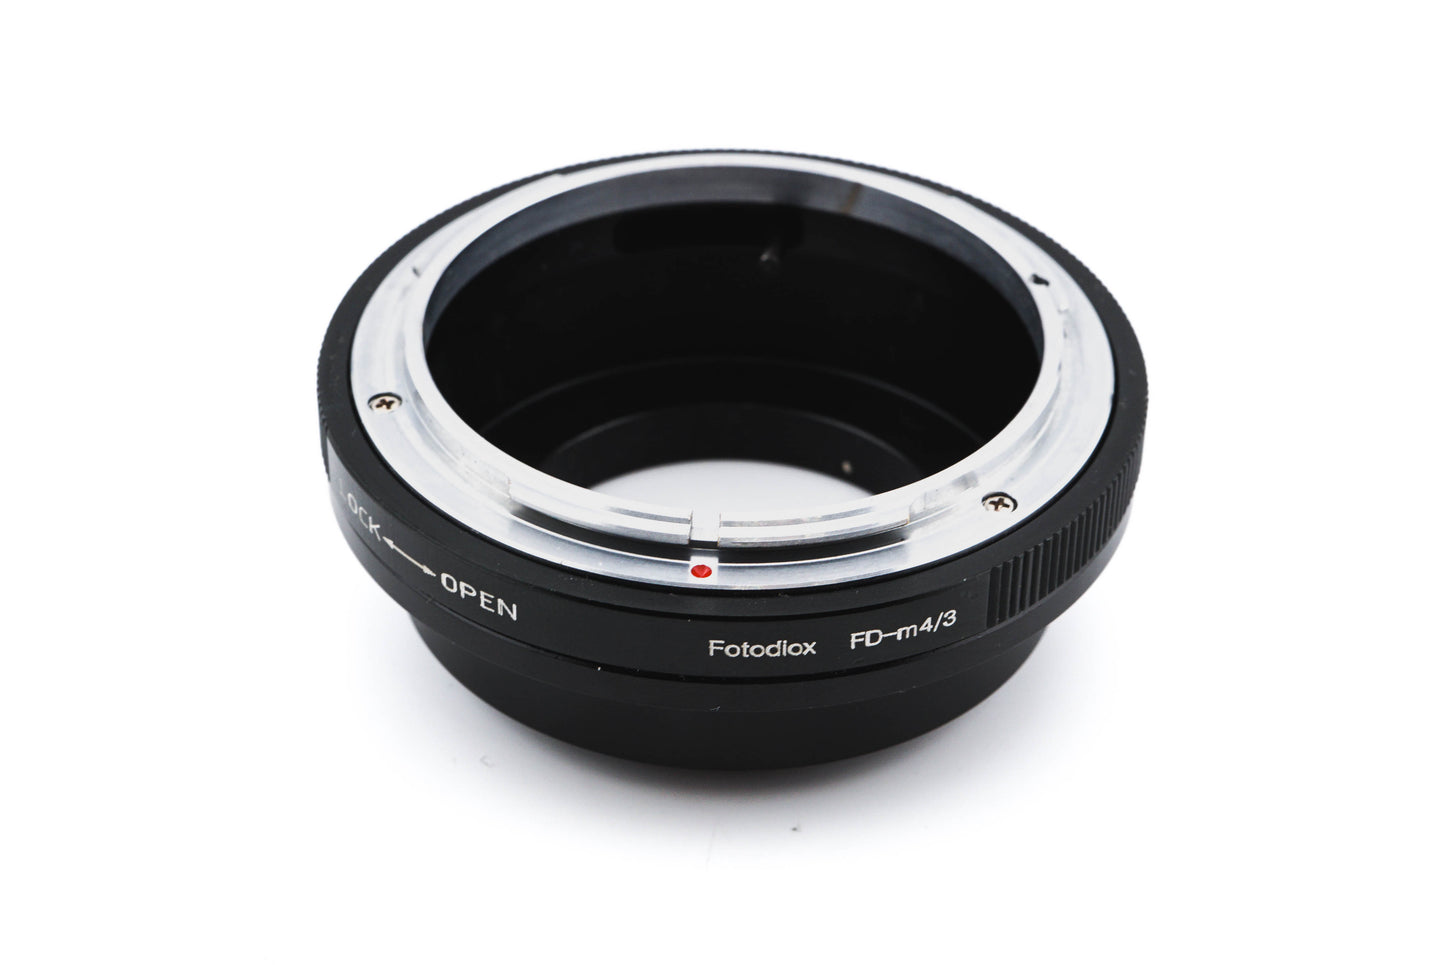 Fotodiox Canon FD - Micro Four Thirds (FD-M4/3) Adapter - Lens Adapter